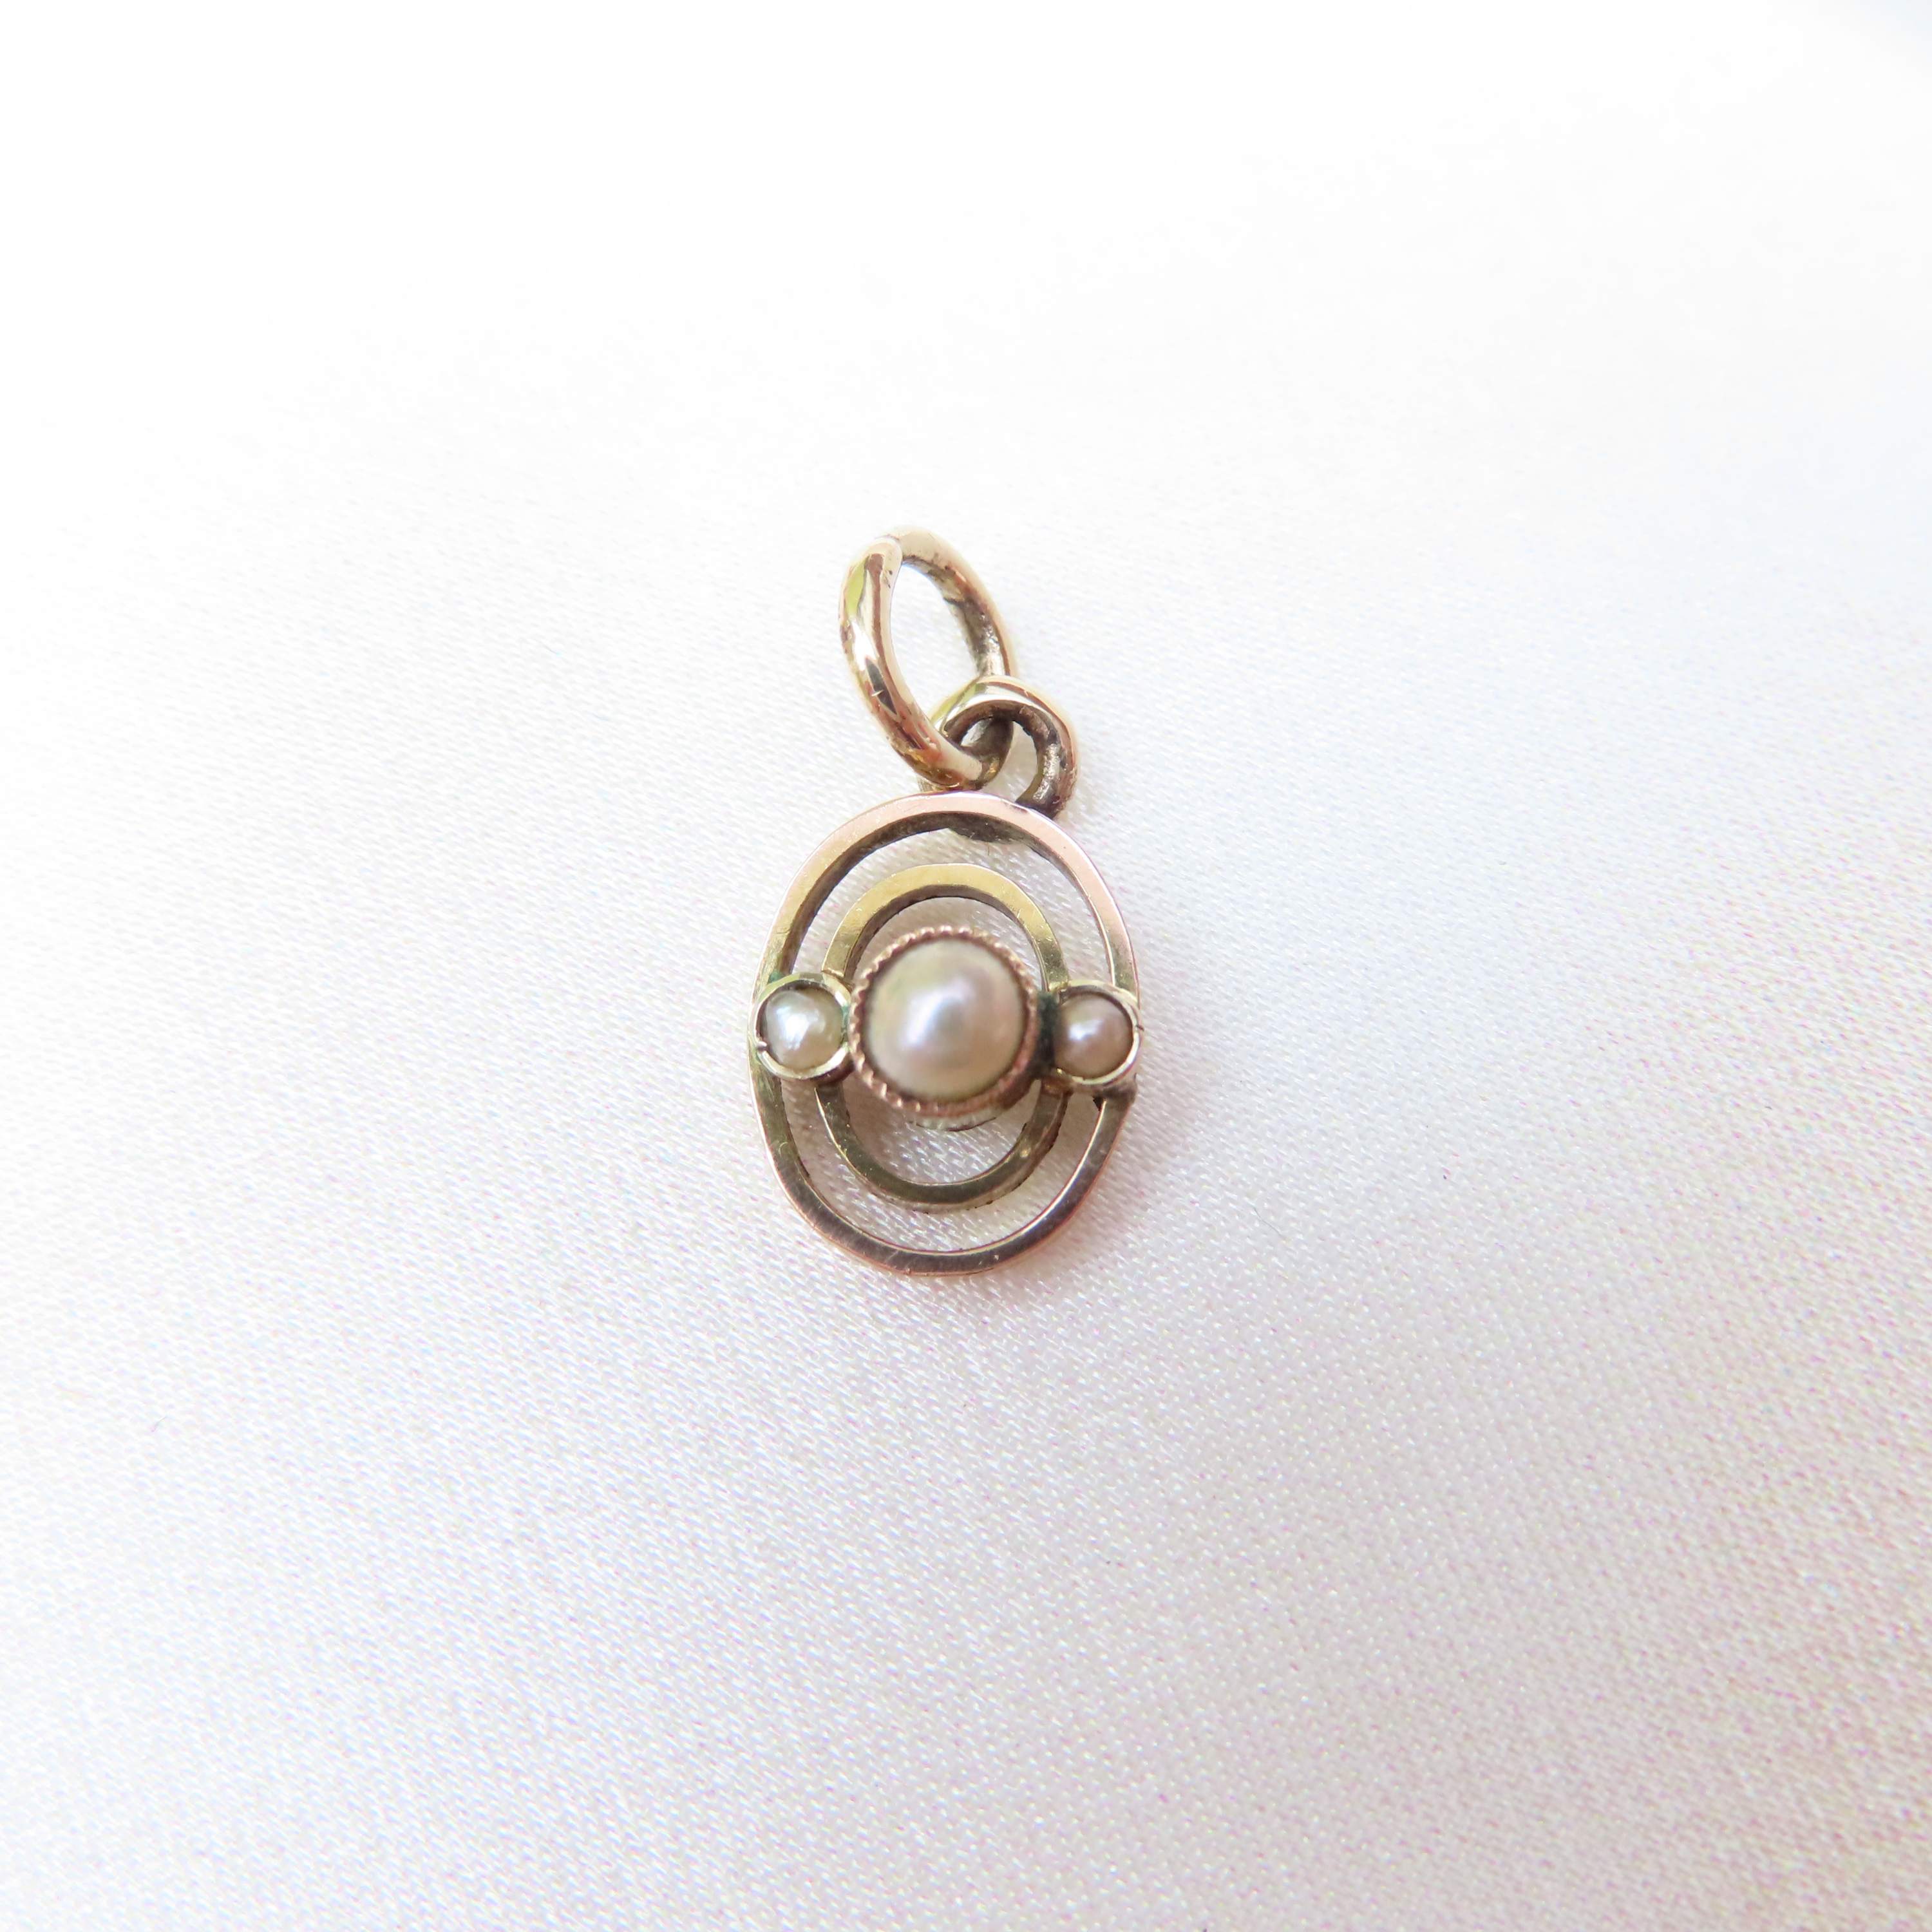 small stick pin conversion charm pearl and 9ct yellow gold